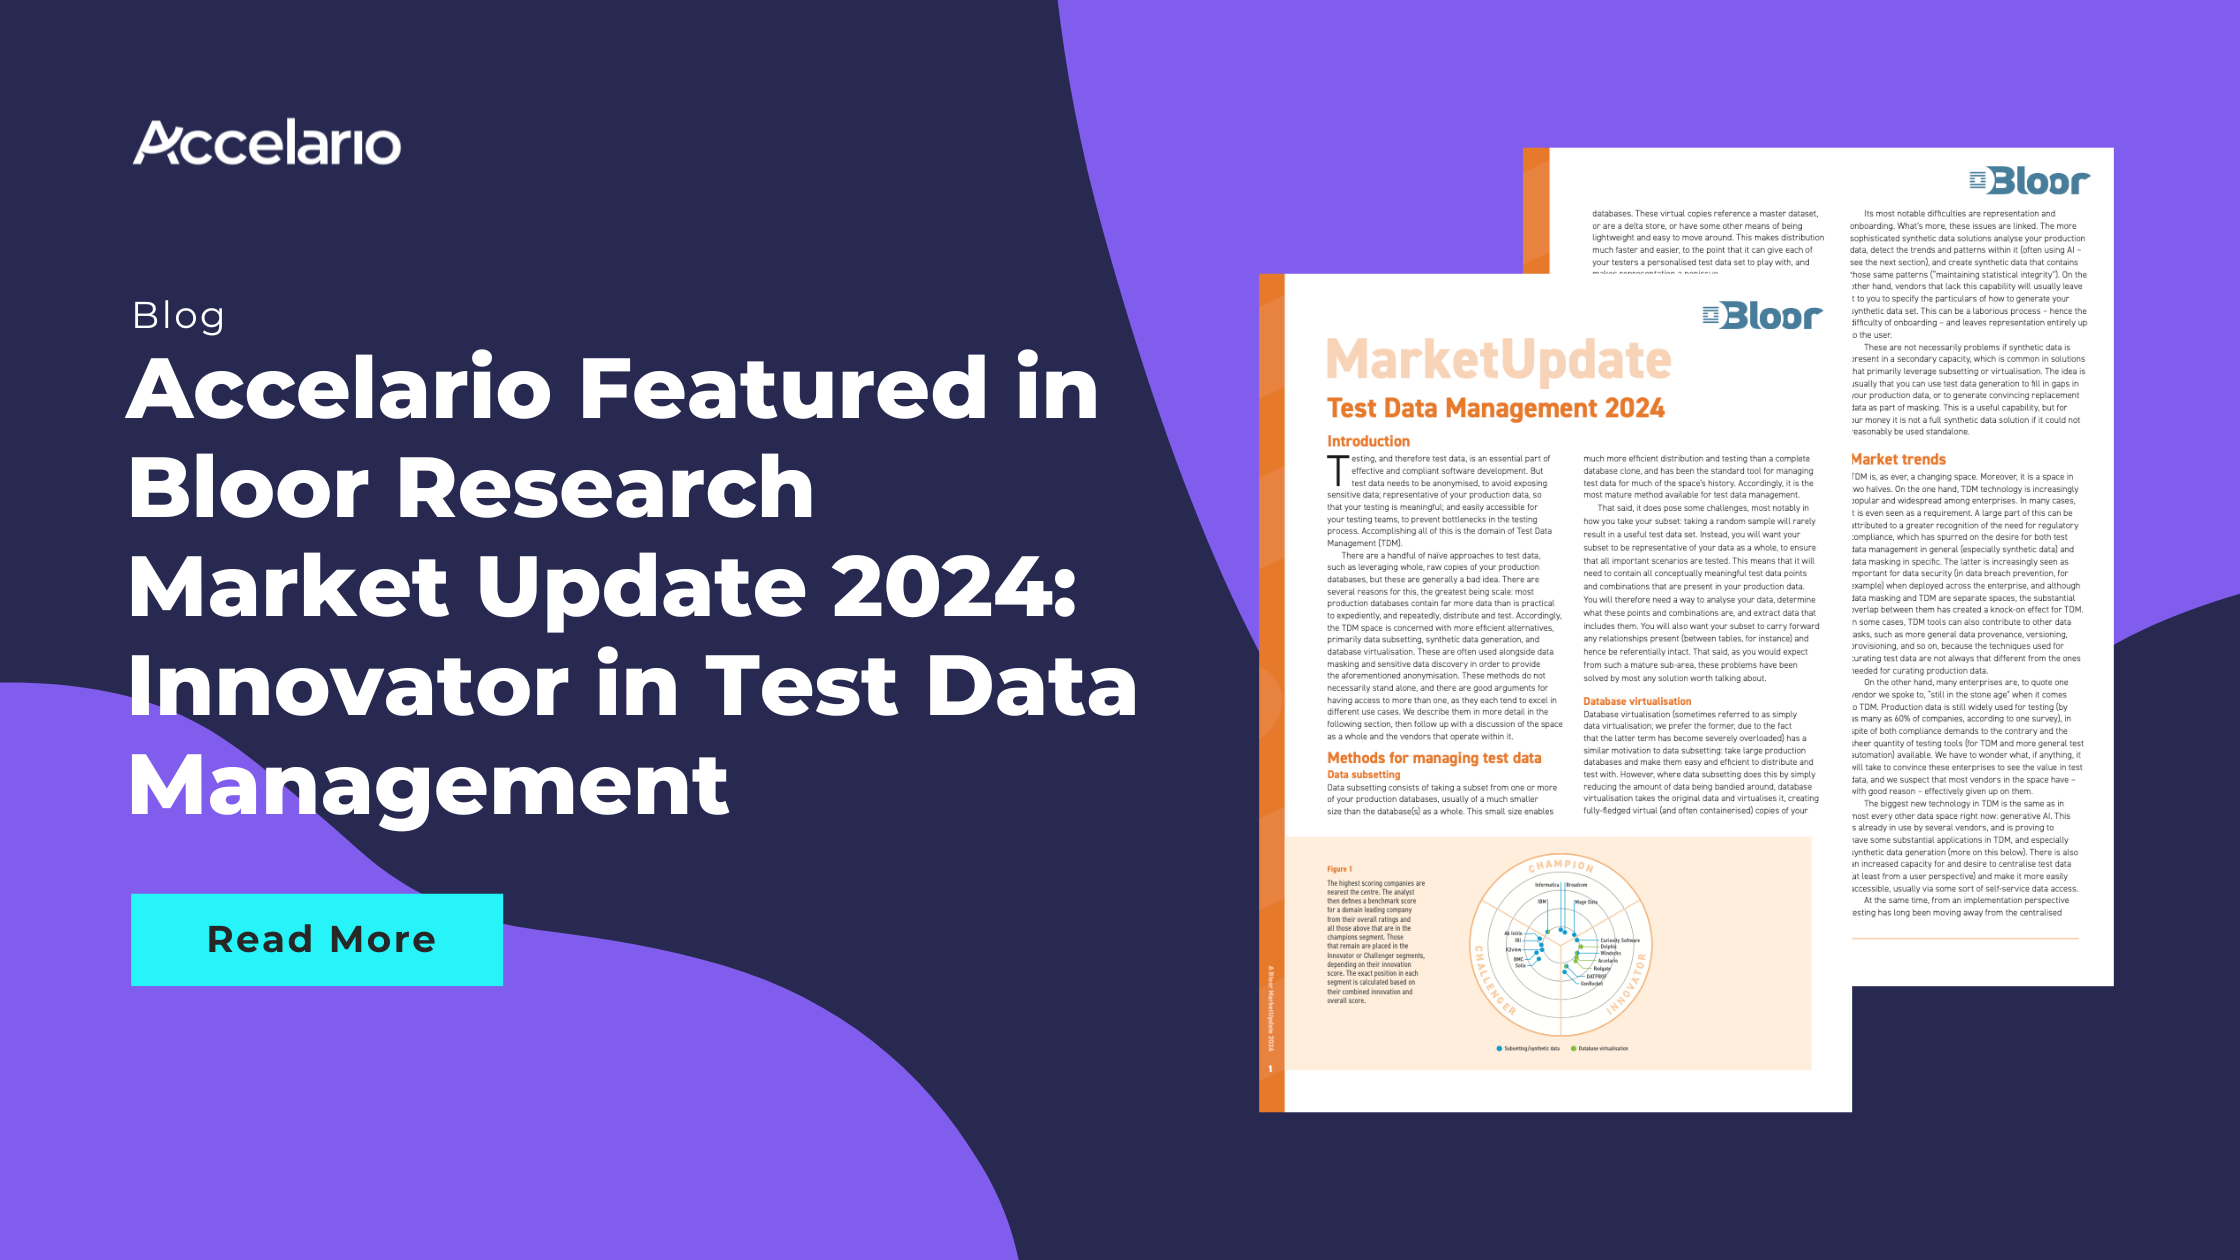 Accelario Featured in Bloor Research Market Update 2024: Innovator in Test Data Management